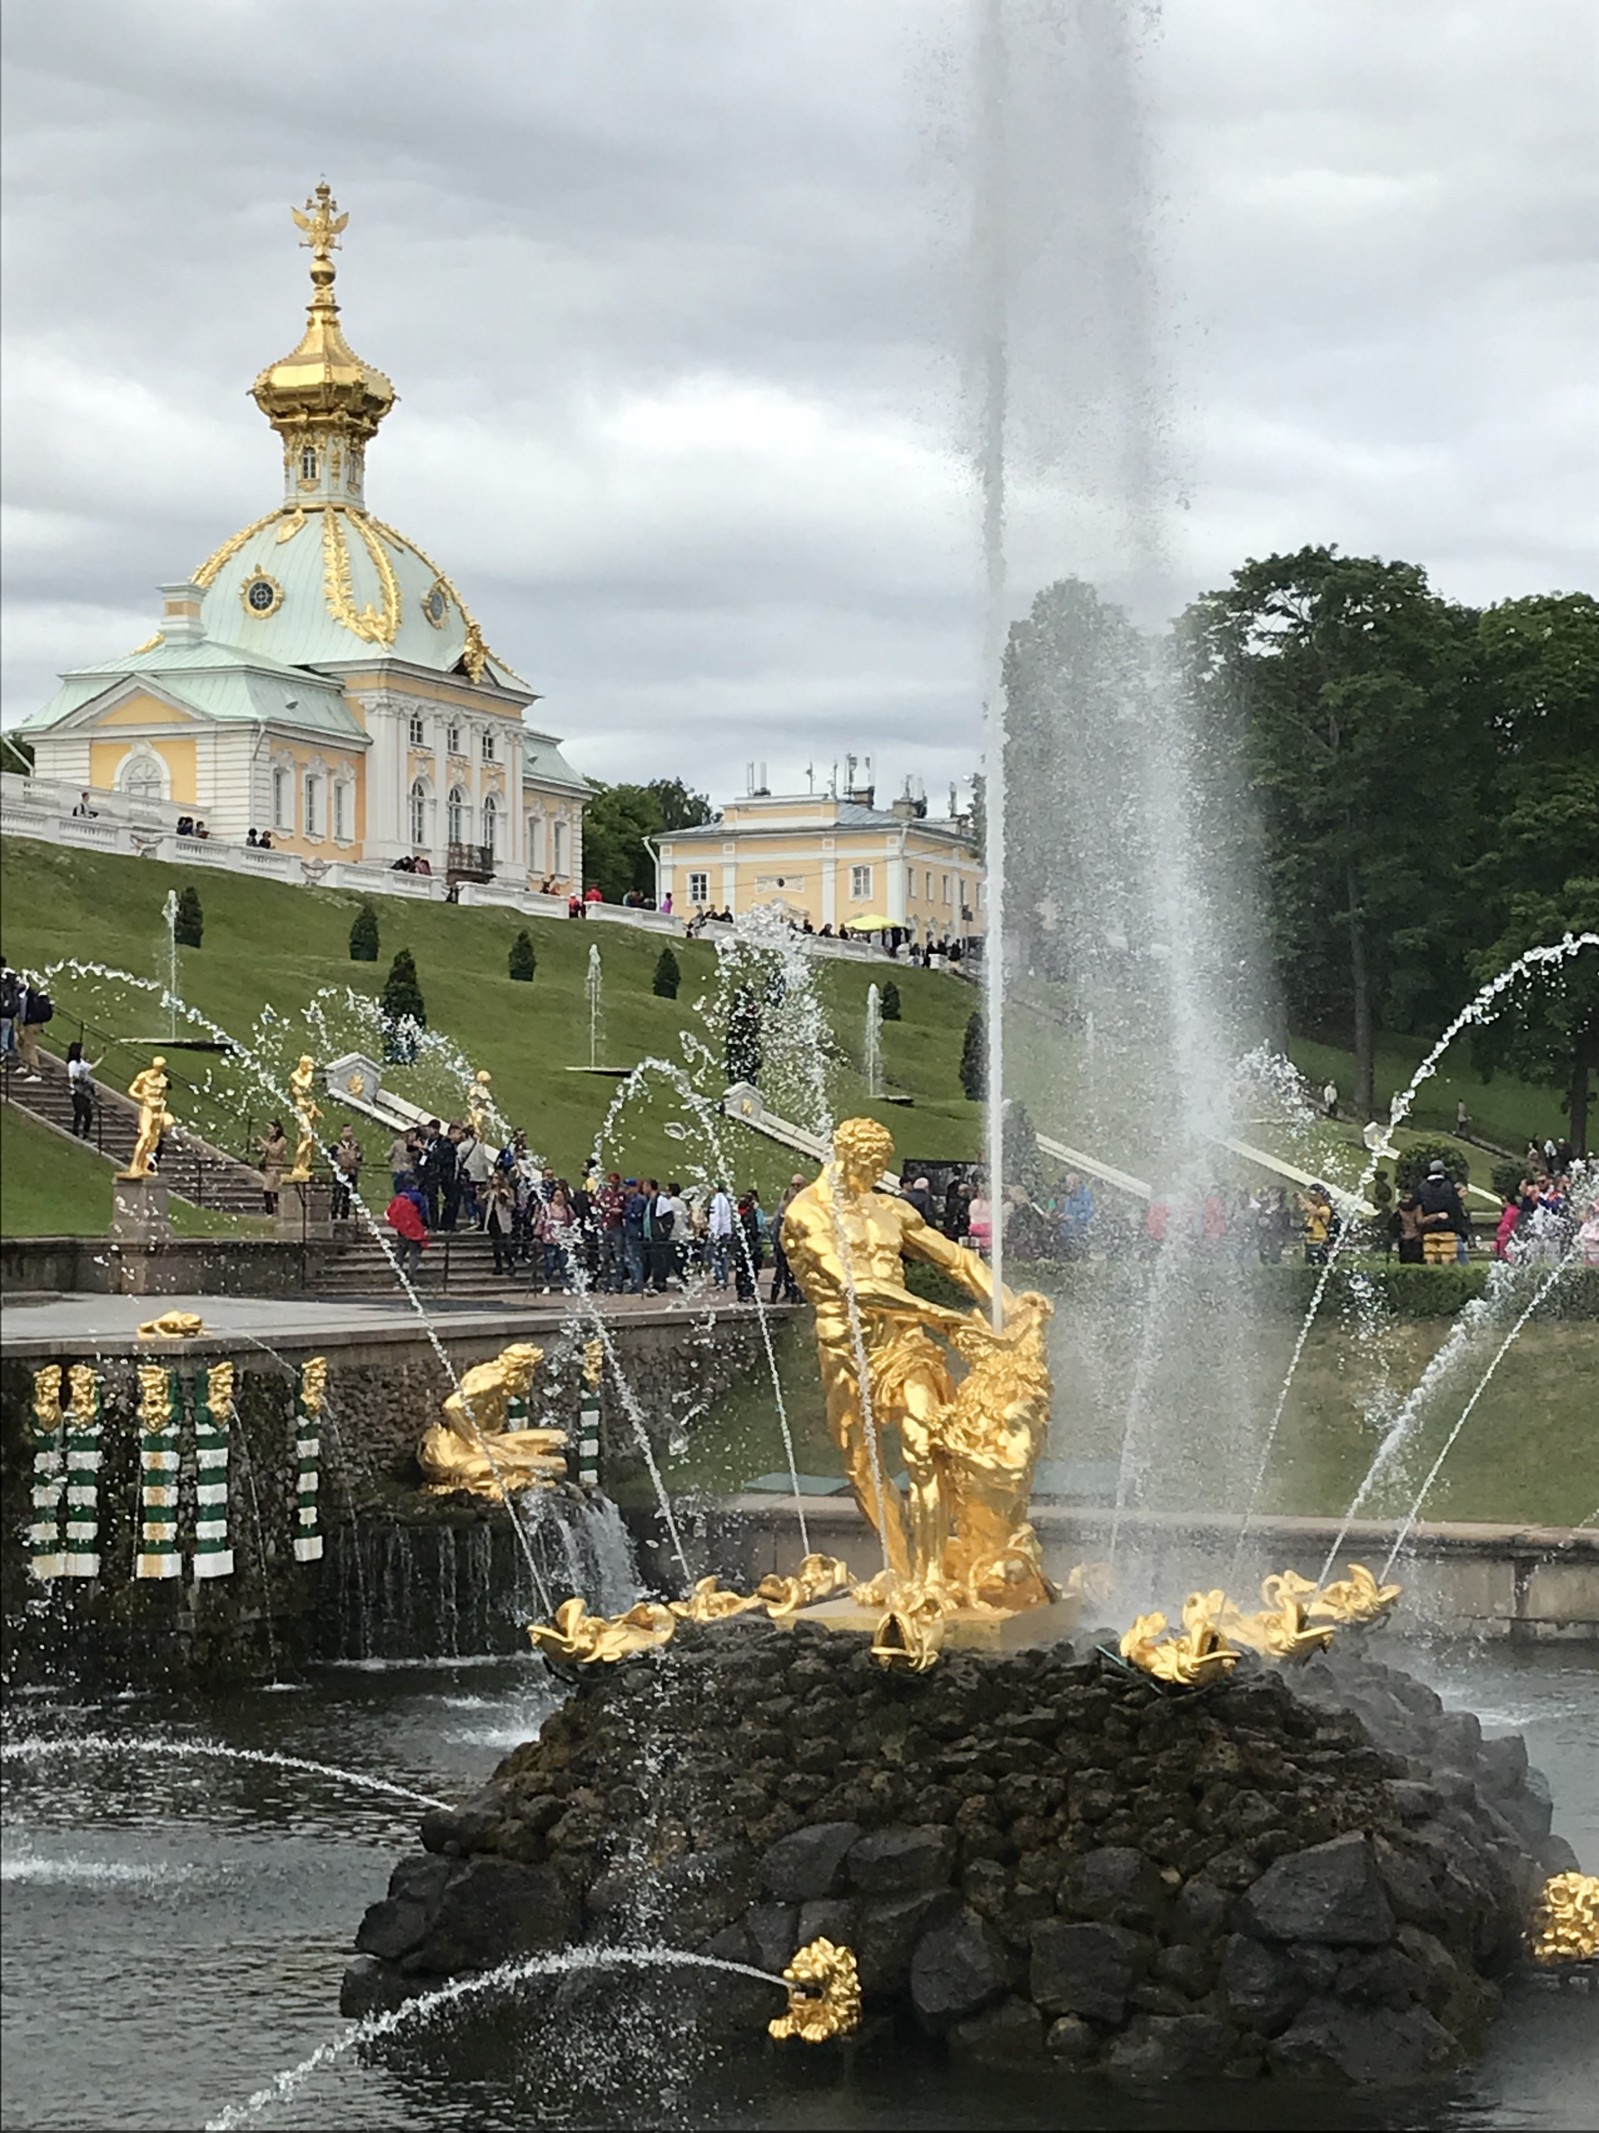 Gilded fountains at the Peterhof Palace.